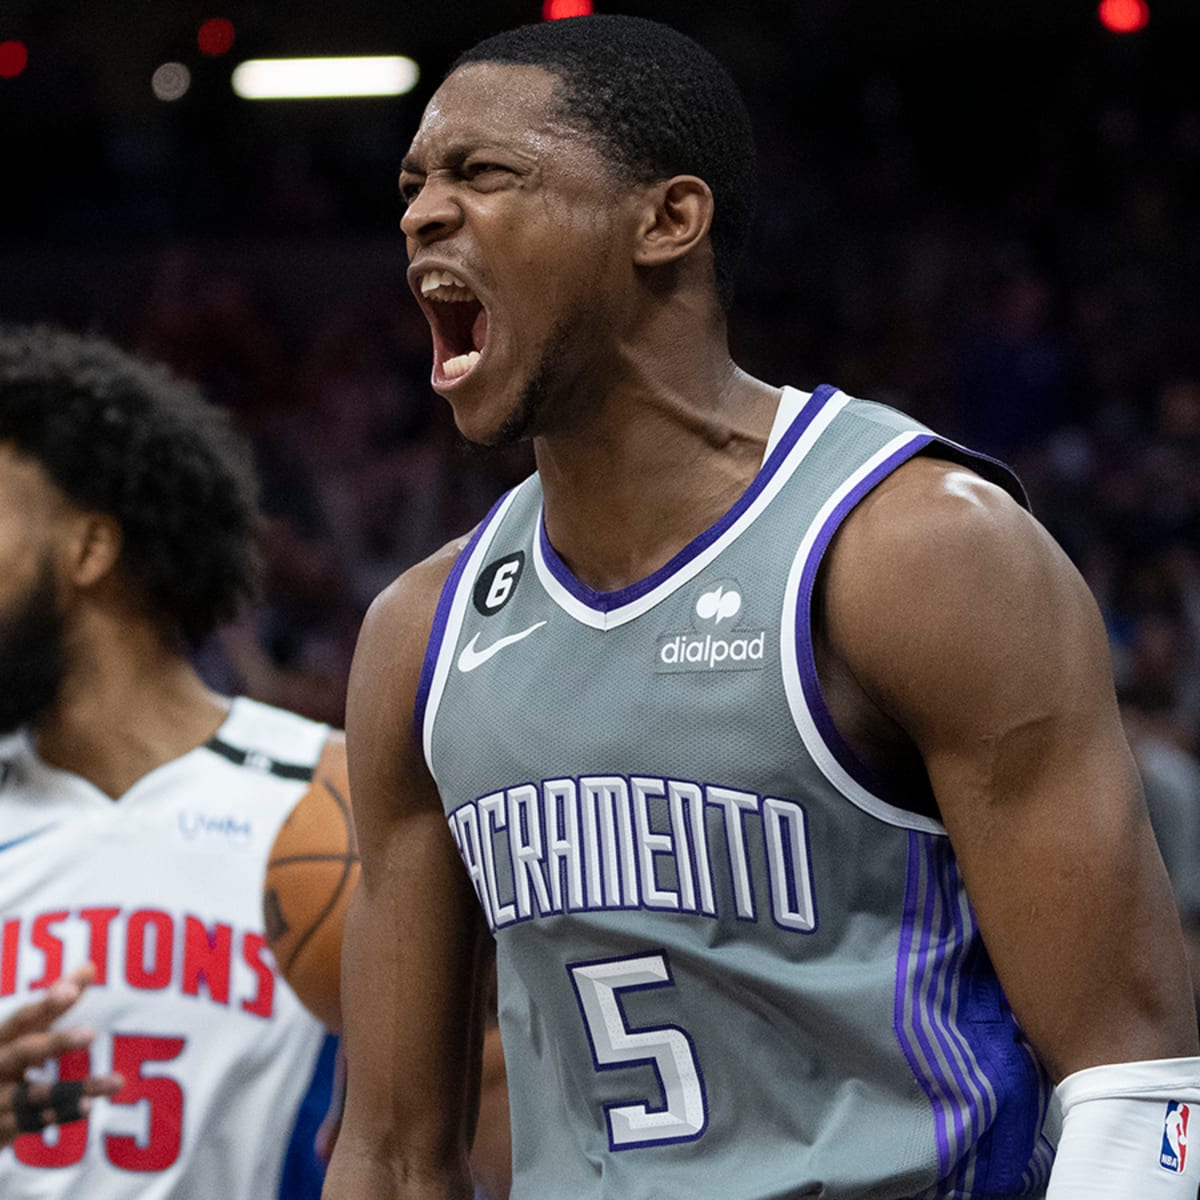 Pistons vs. Hornets preview: Pistons face another up-and-coming team -  Detroit Bad Boys